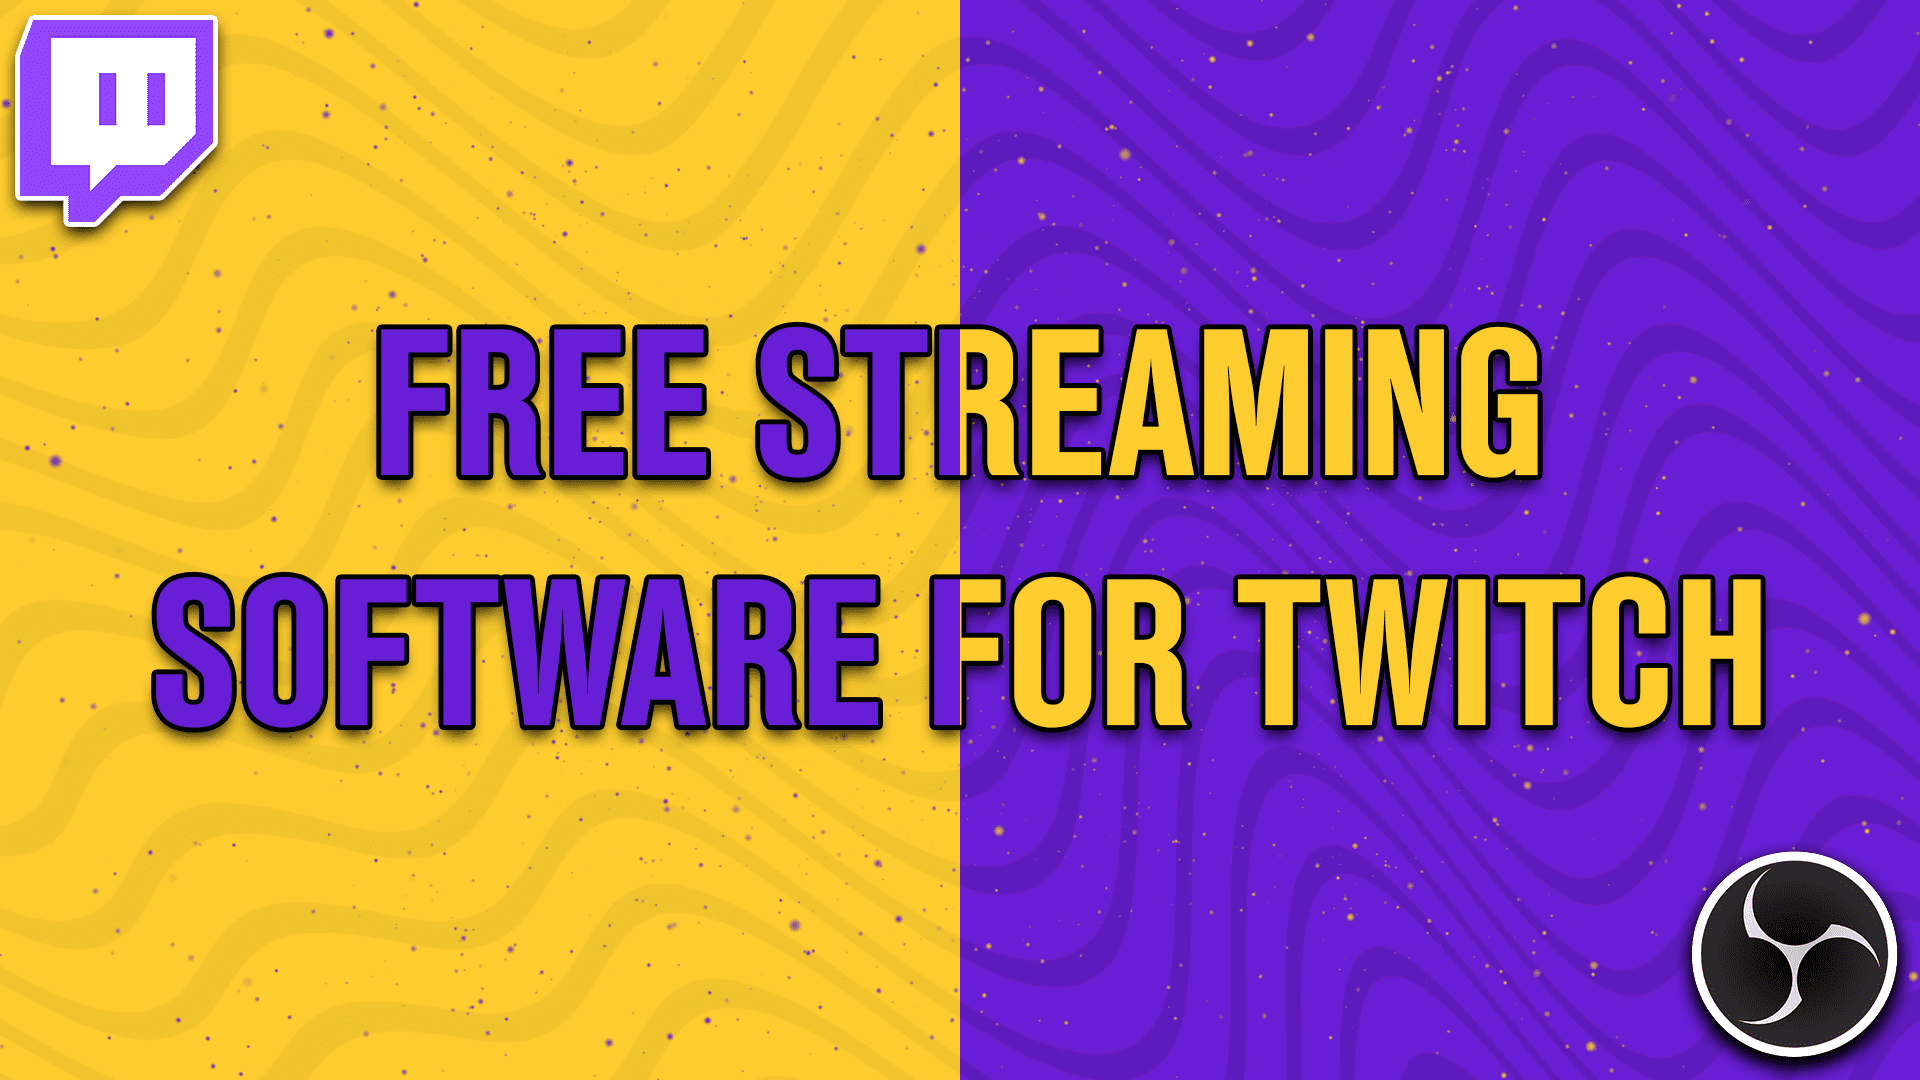 Free streaming software for twitch - StreamBee